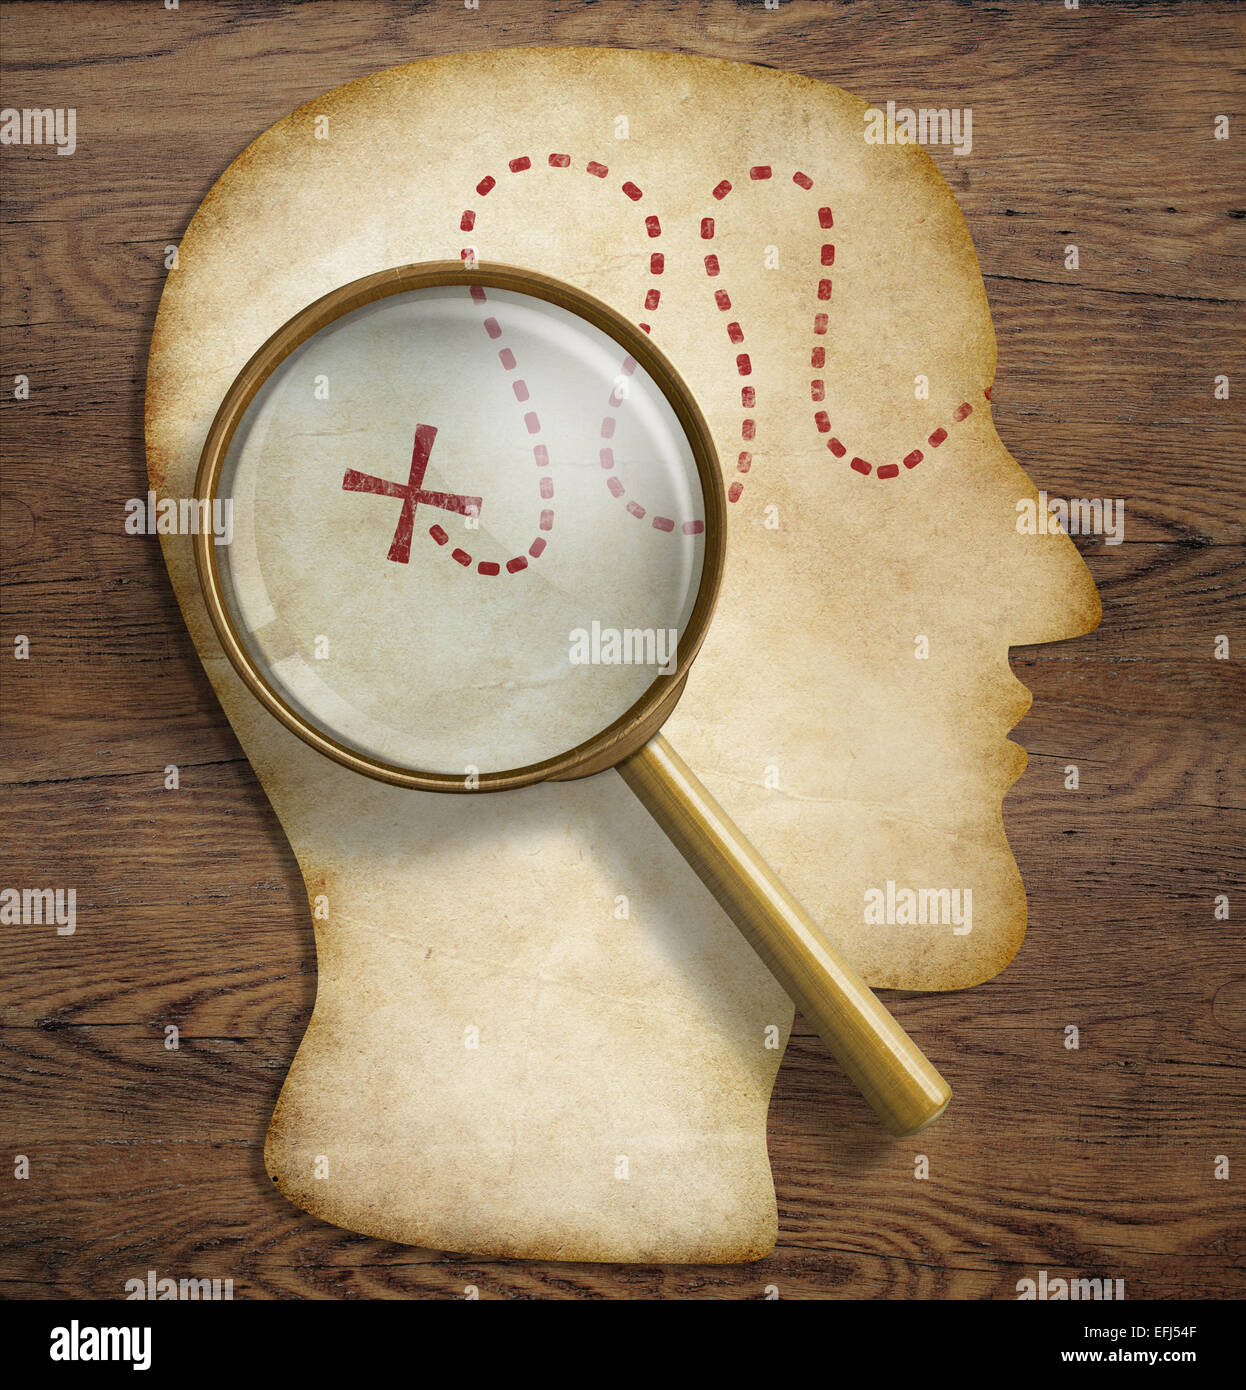 Brain, inner world, psychology, talent exploration and discovering concept. Stock Photo